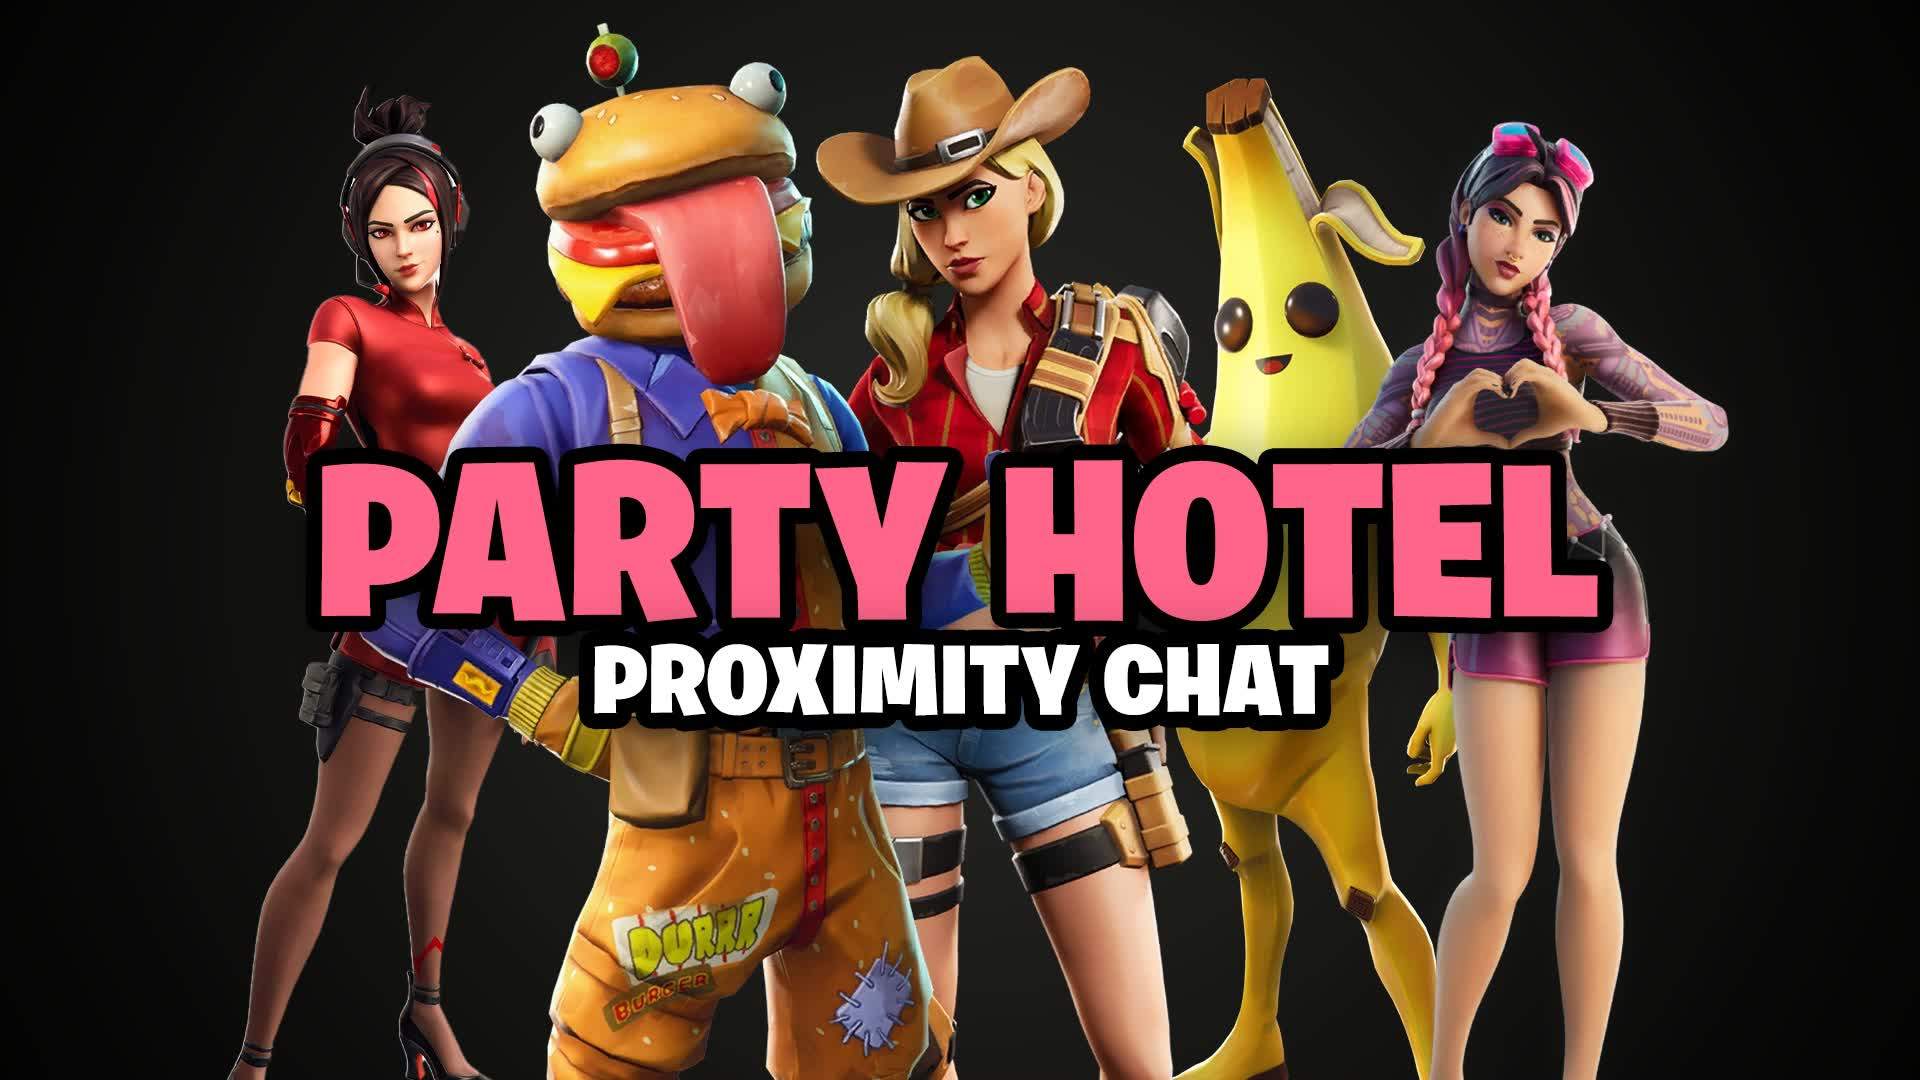 PARTY HOTEL - PROXIMITY CHAT 5151-1412-9080